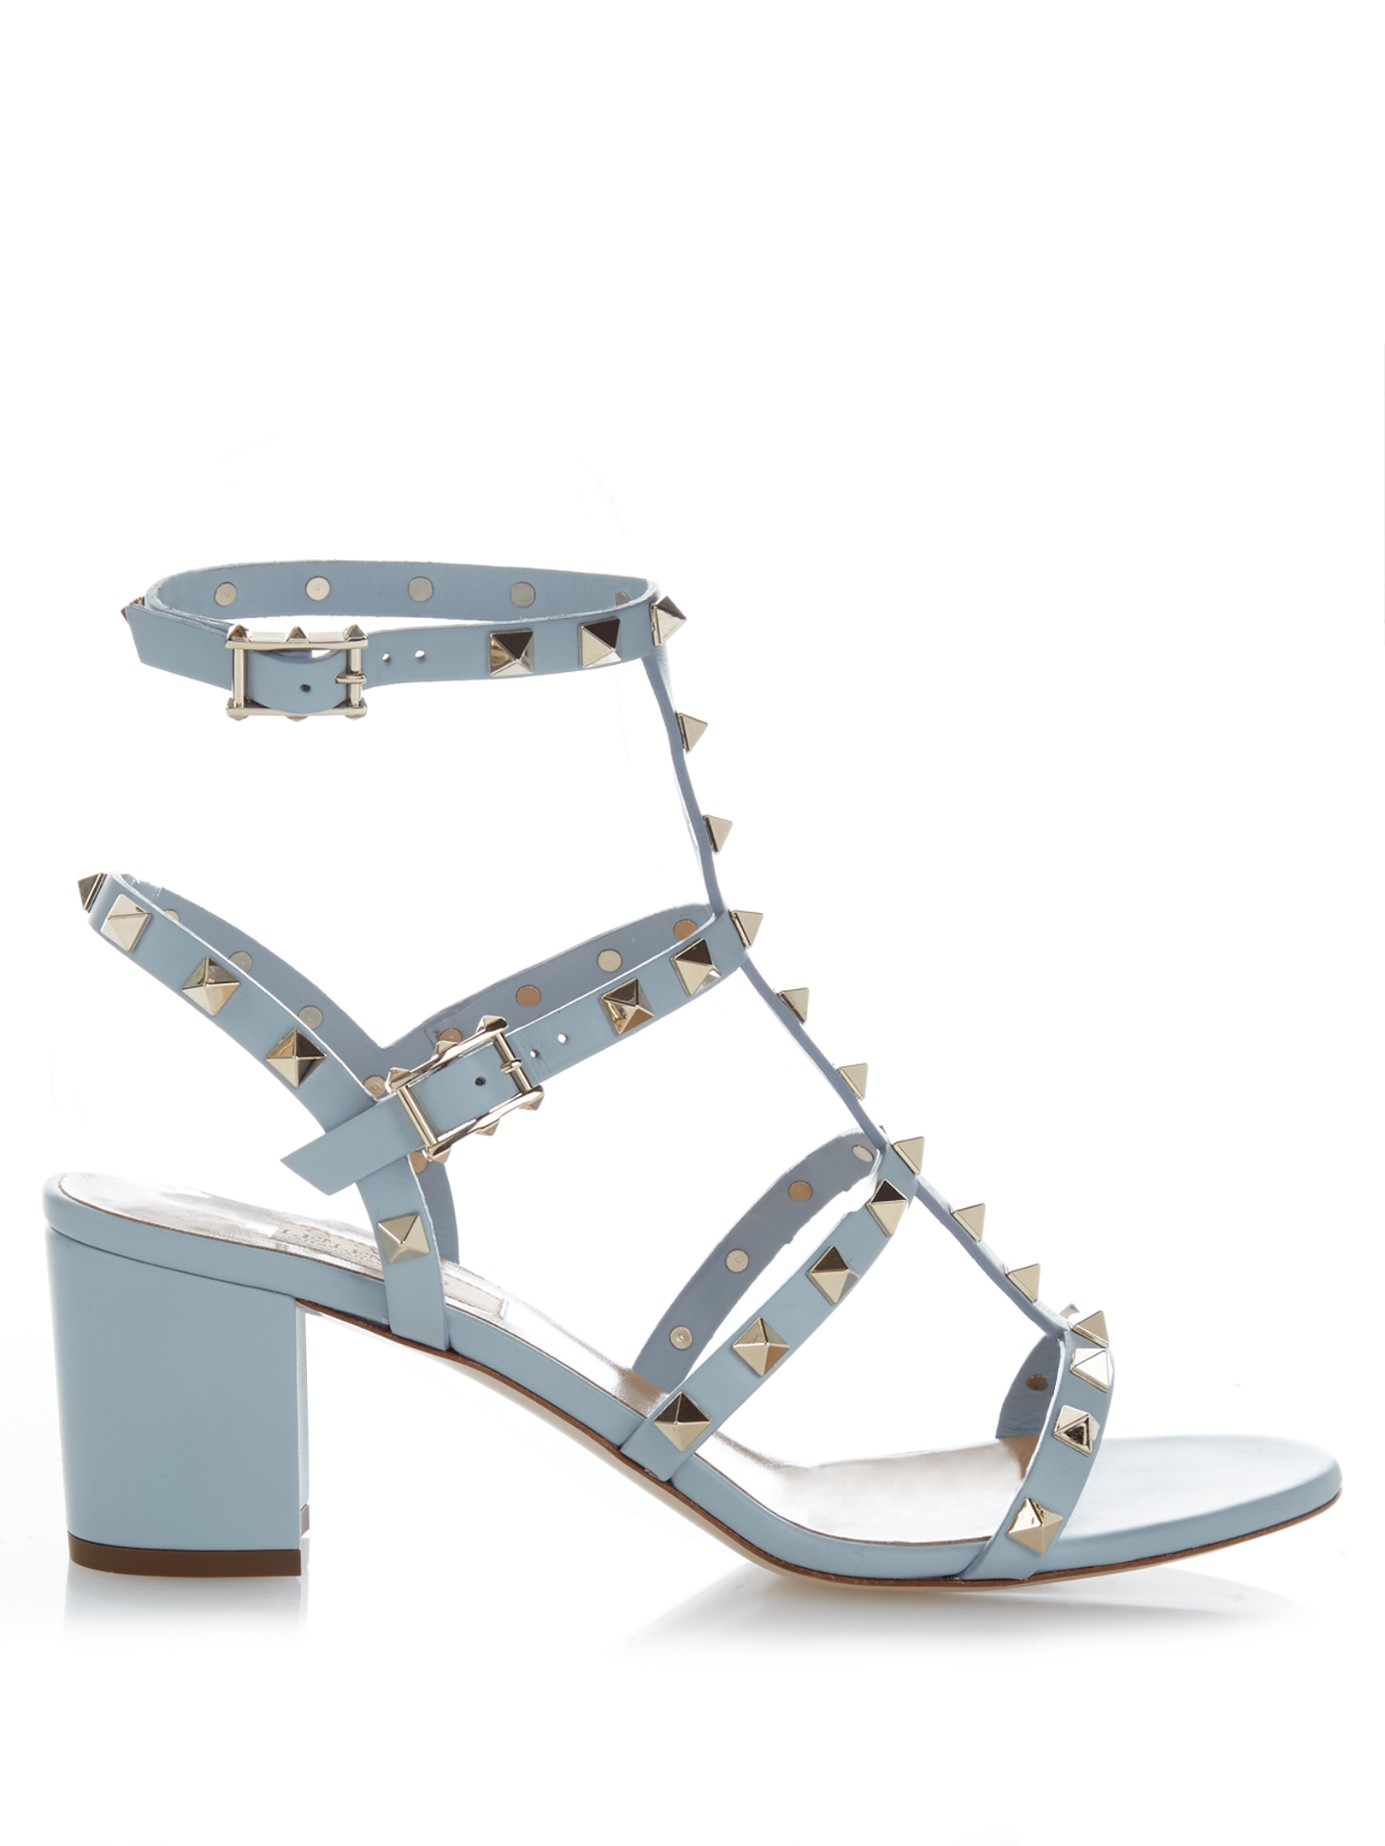 Lyst - Valentino Rockstud Leather Sandals in Blue